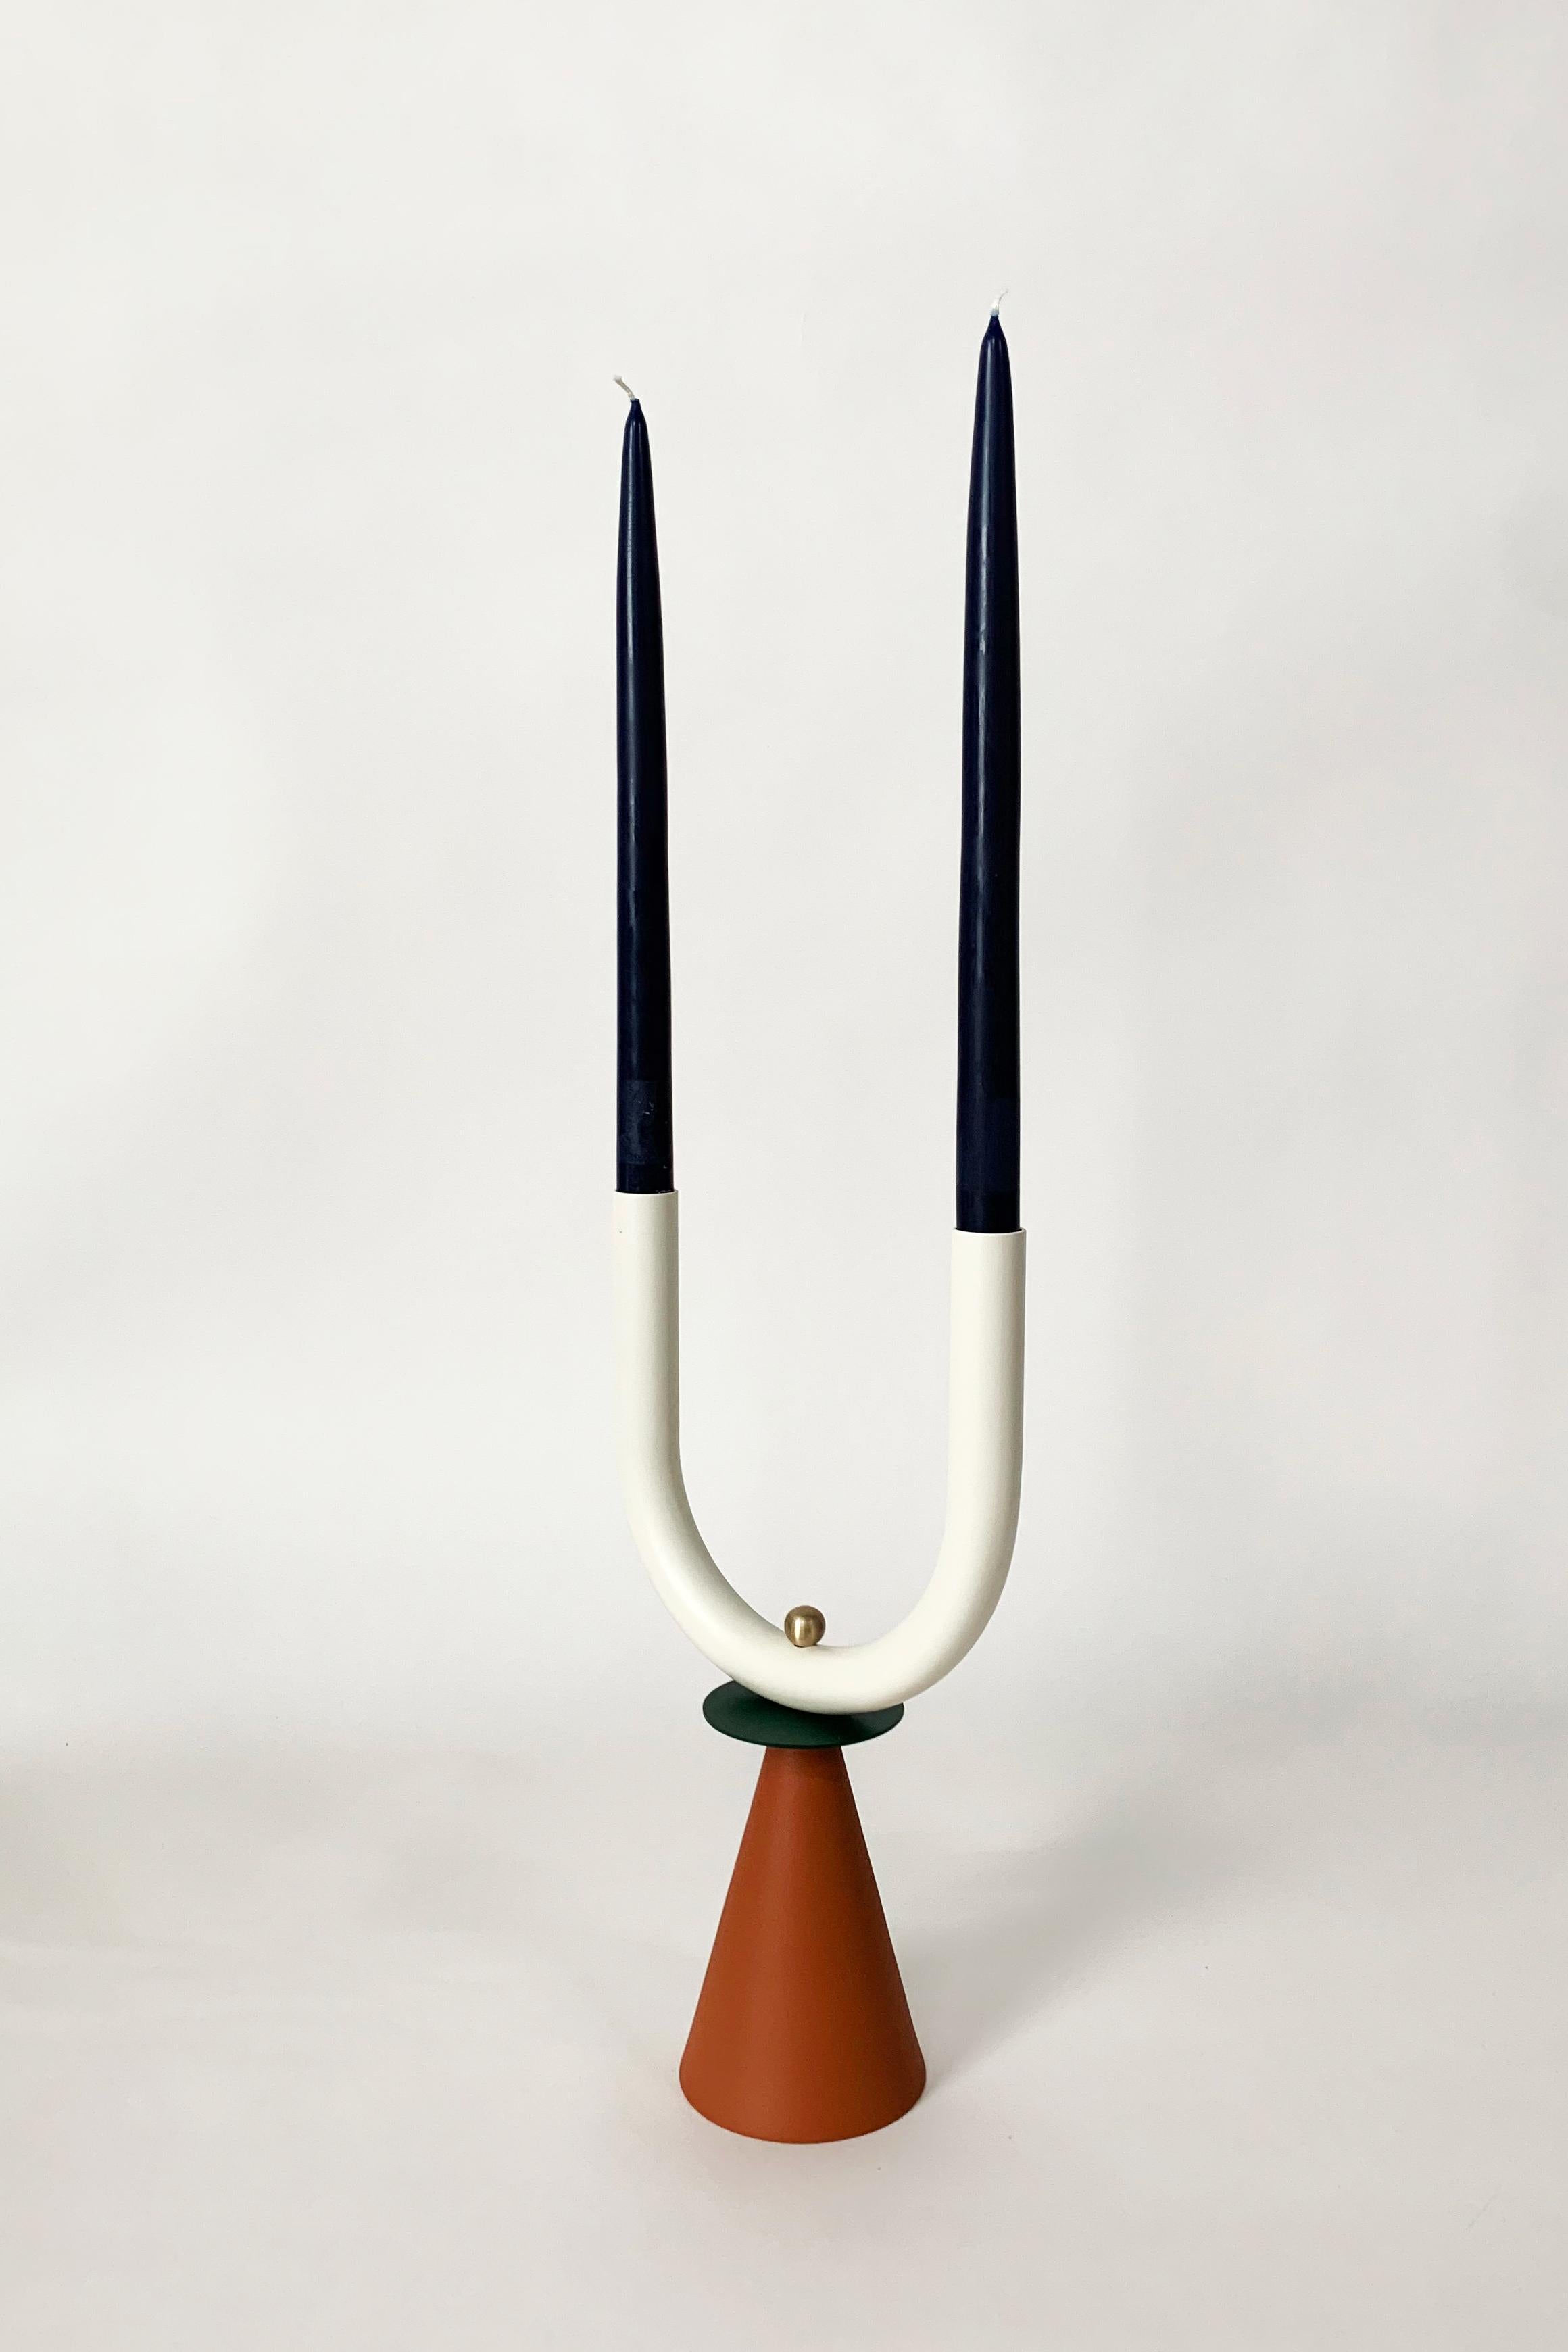 Post-Modern Oxbow Candlestick in Lacquered Steel and Satin Brushed Brass by Steven Bukowski